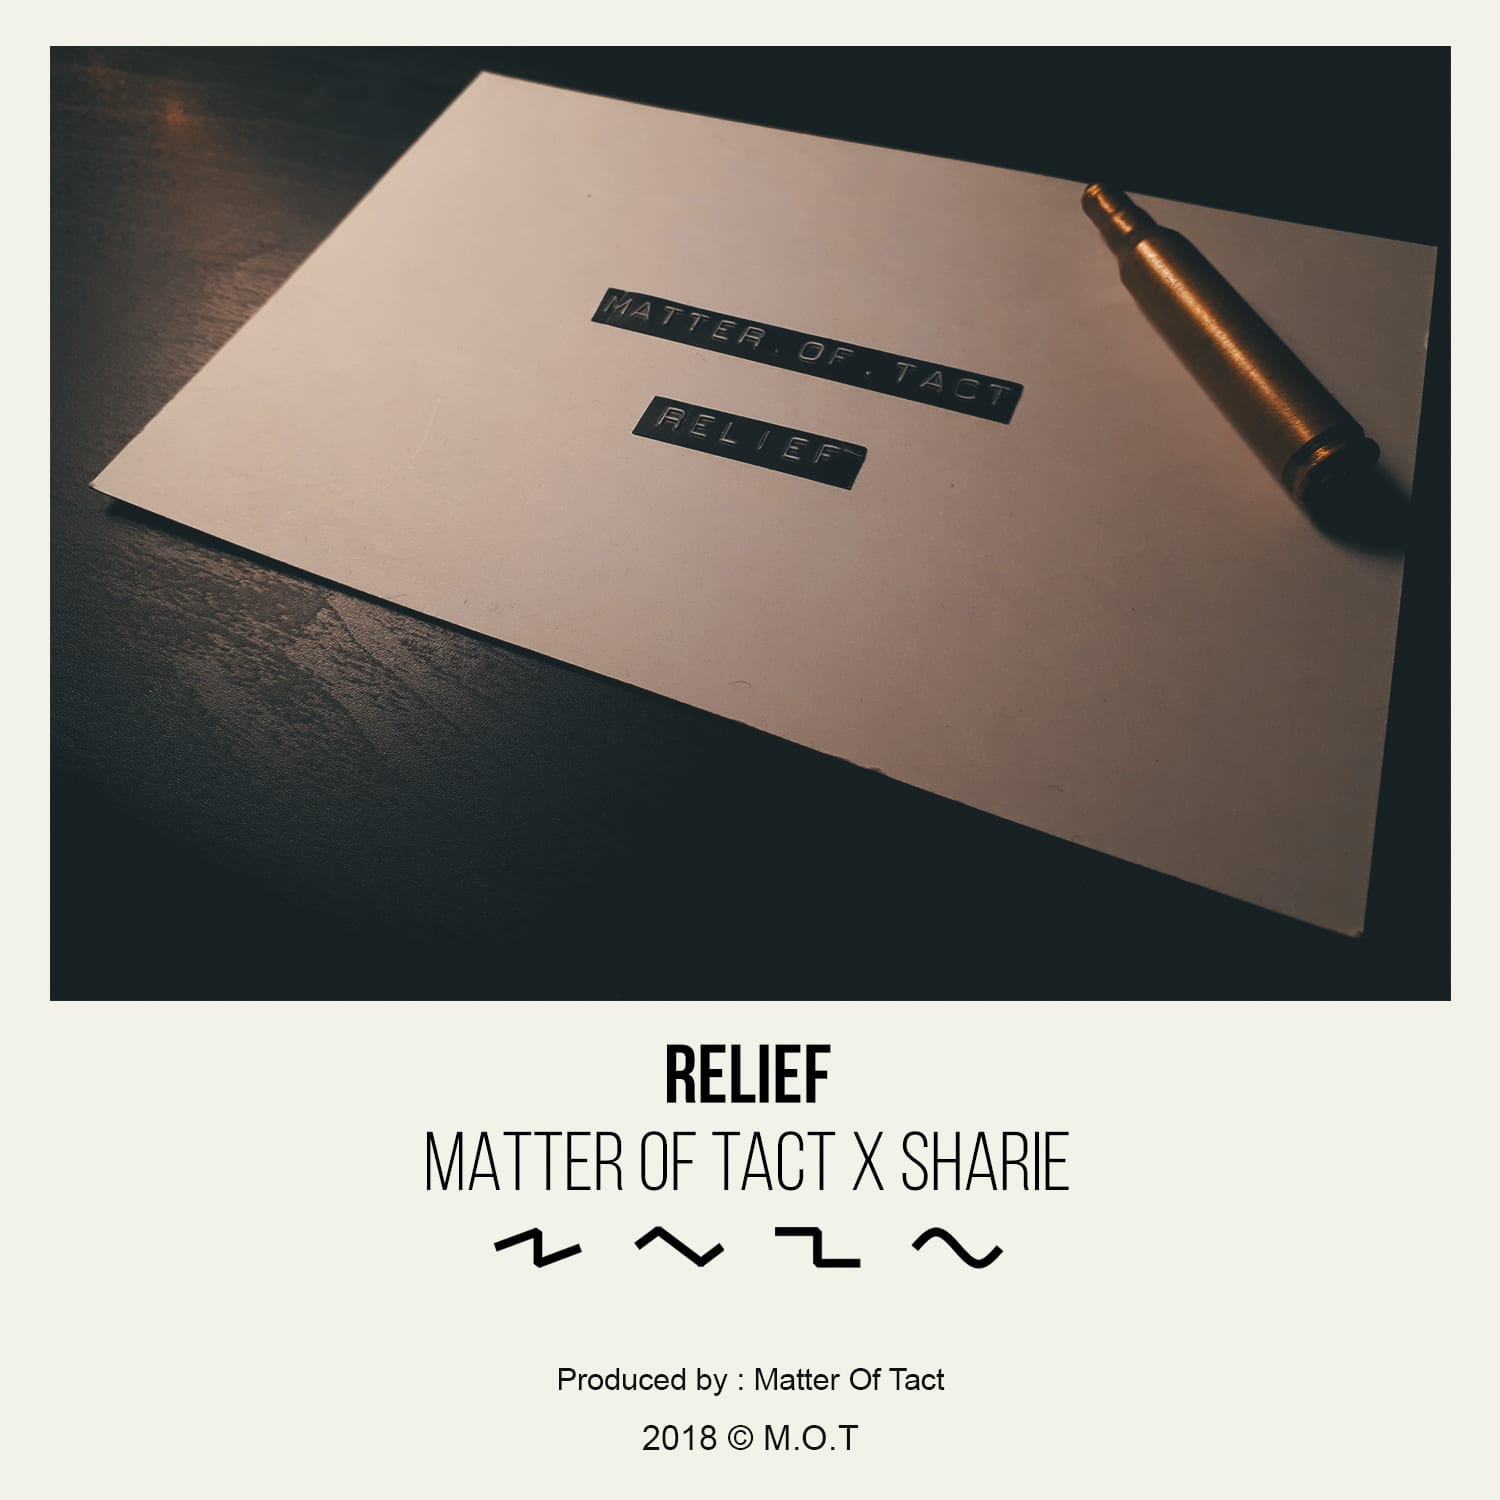 Matter Of Tact and Sharie on “Relief”